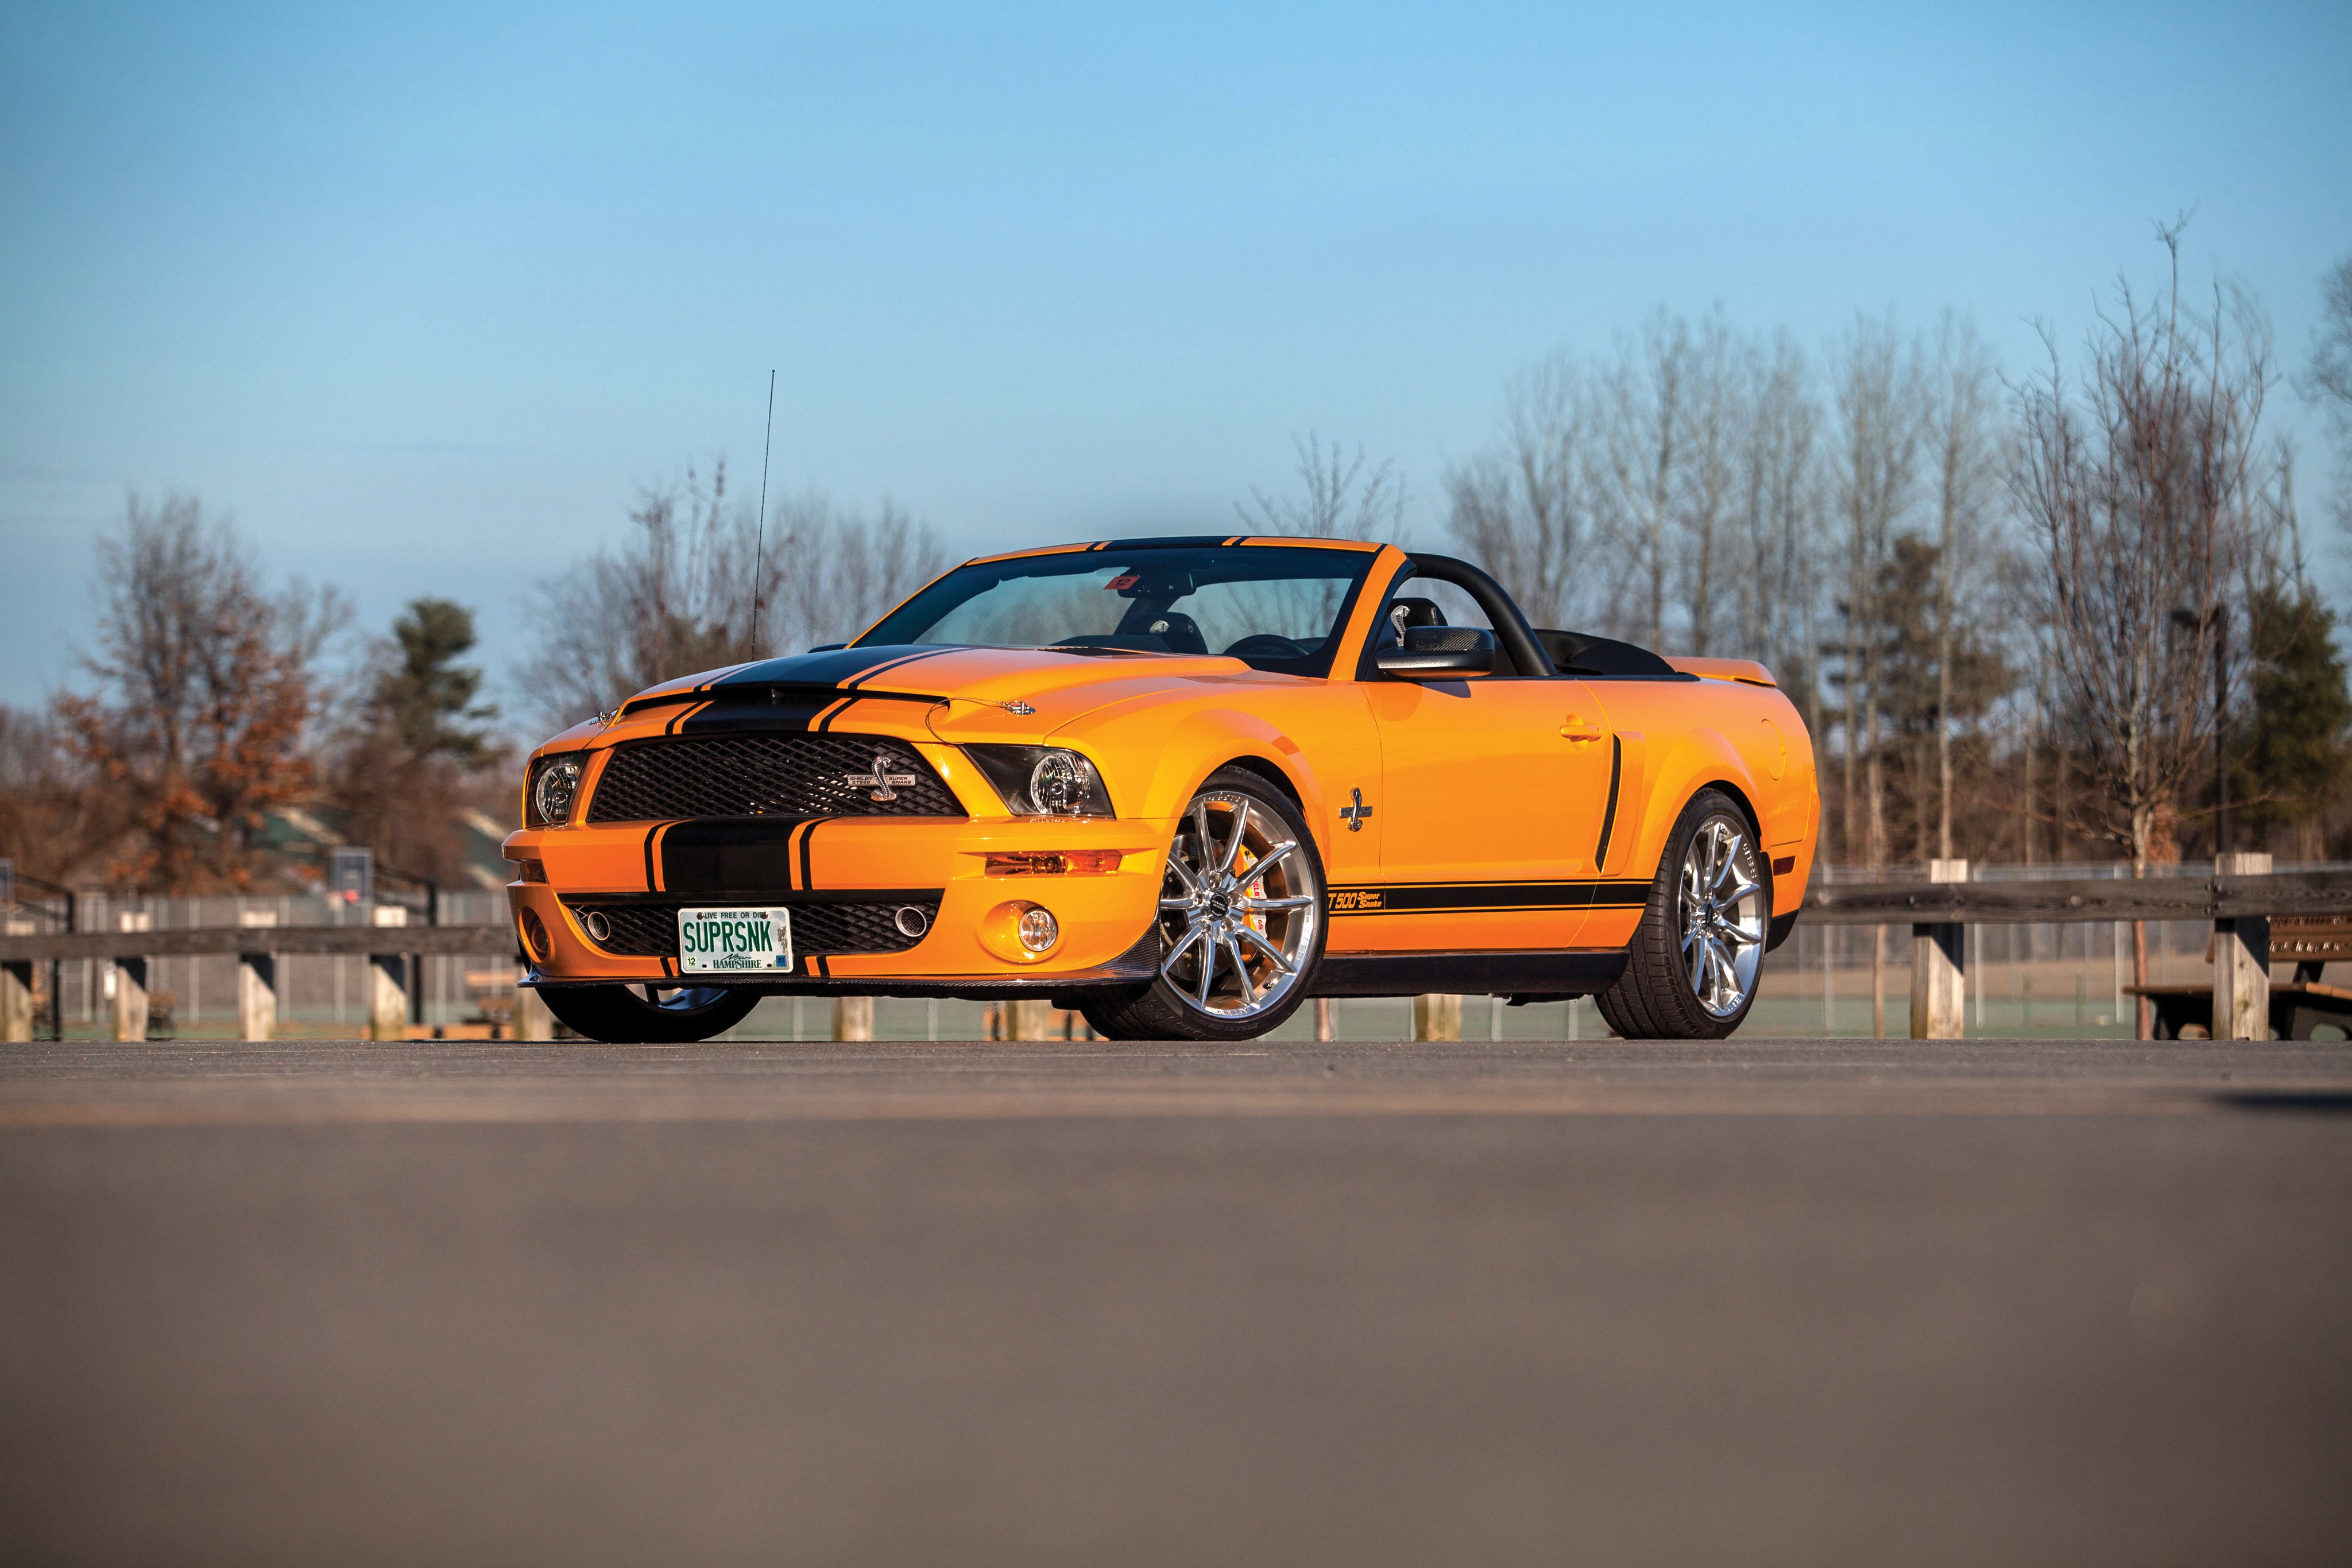 2007, Shelby, Gt500, Super, Snake, Convertible, Prototype, Ford, Mustang, Muscle, G t Wallpaper